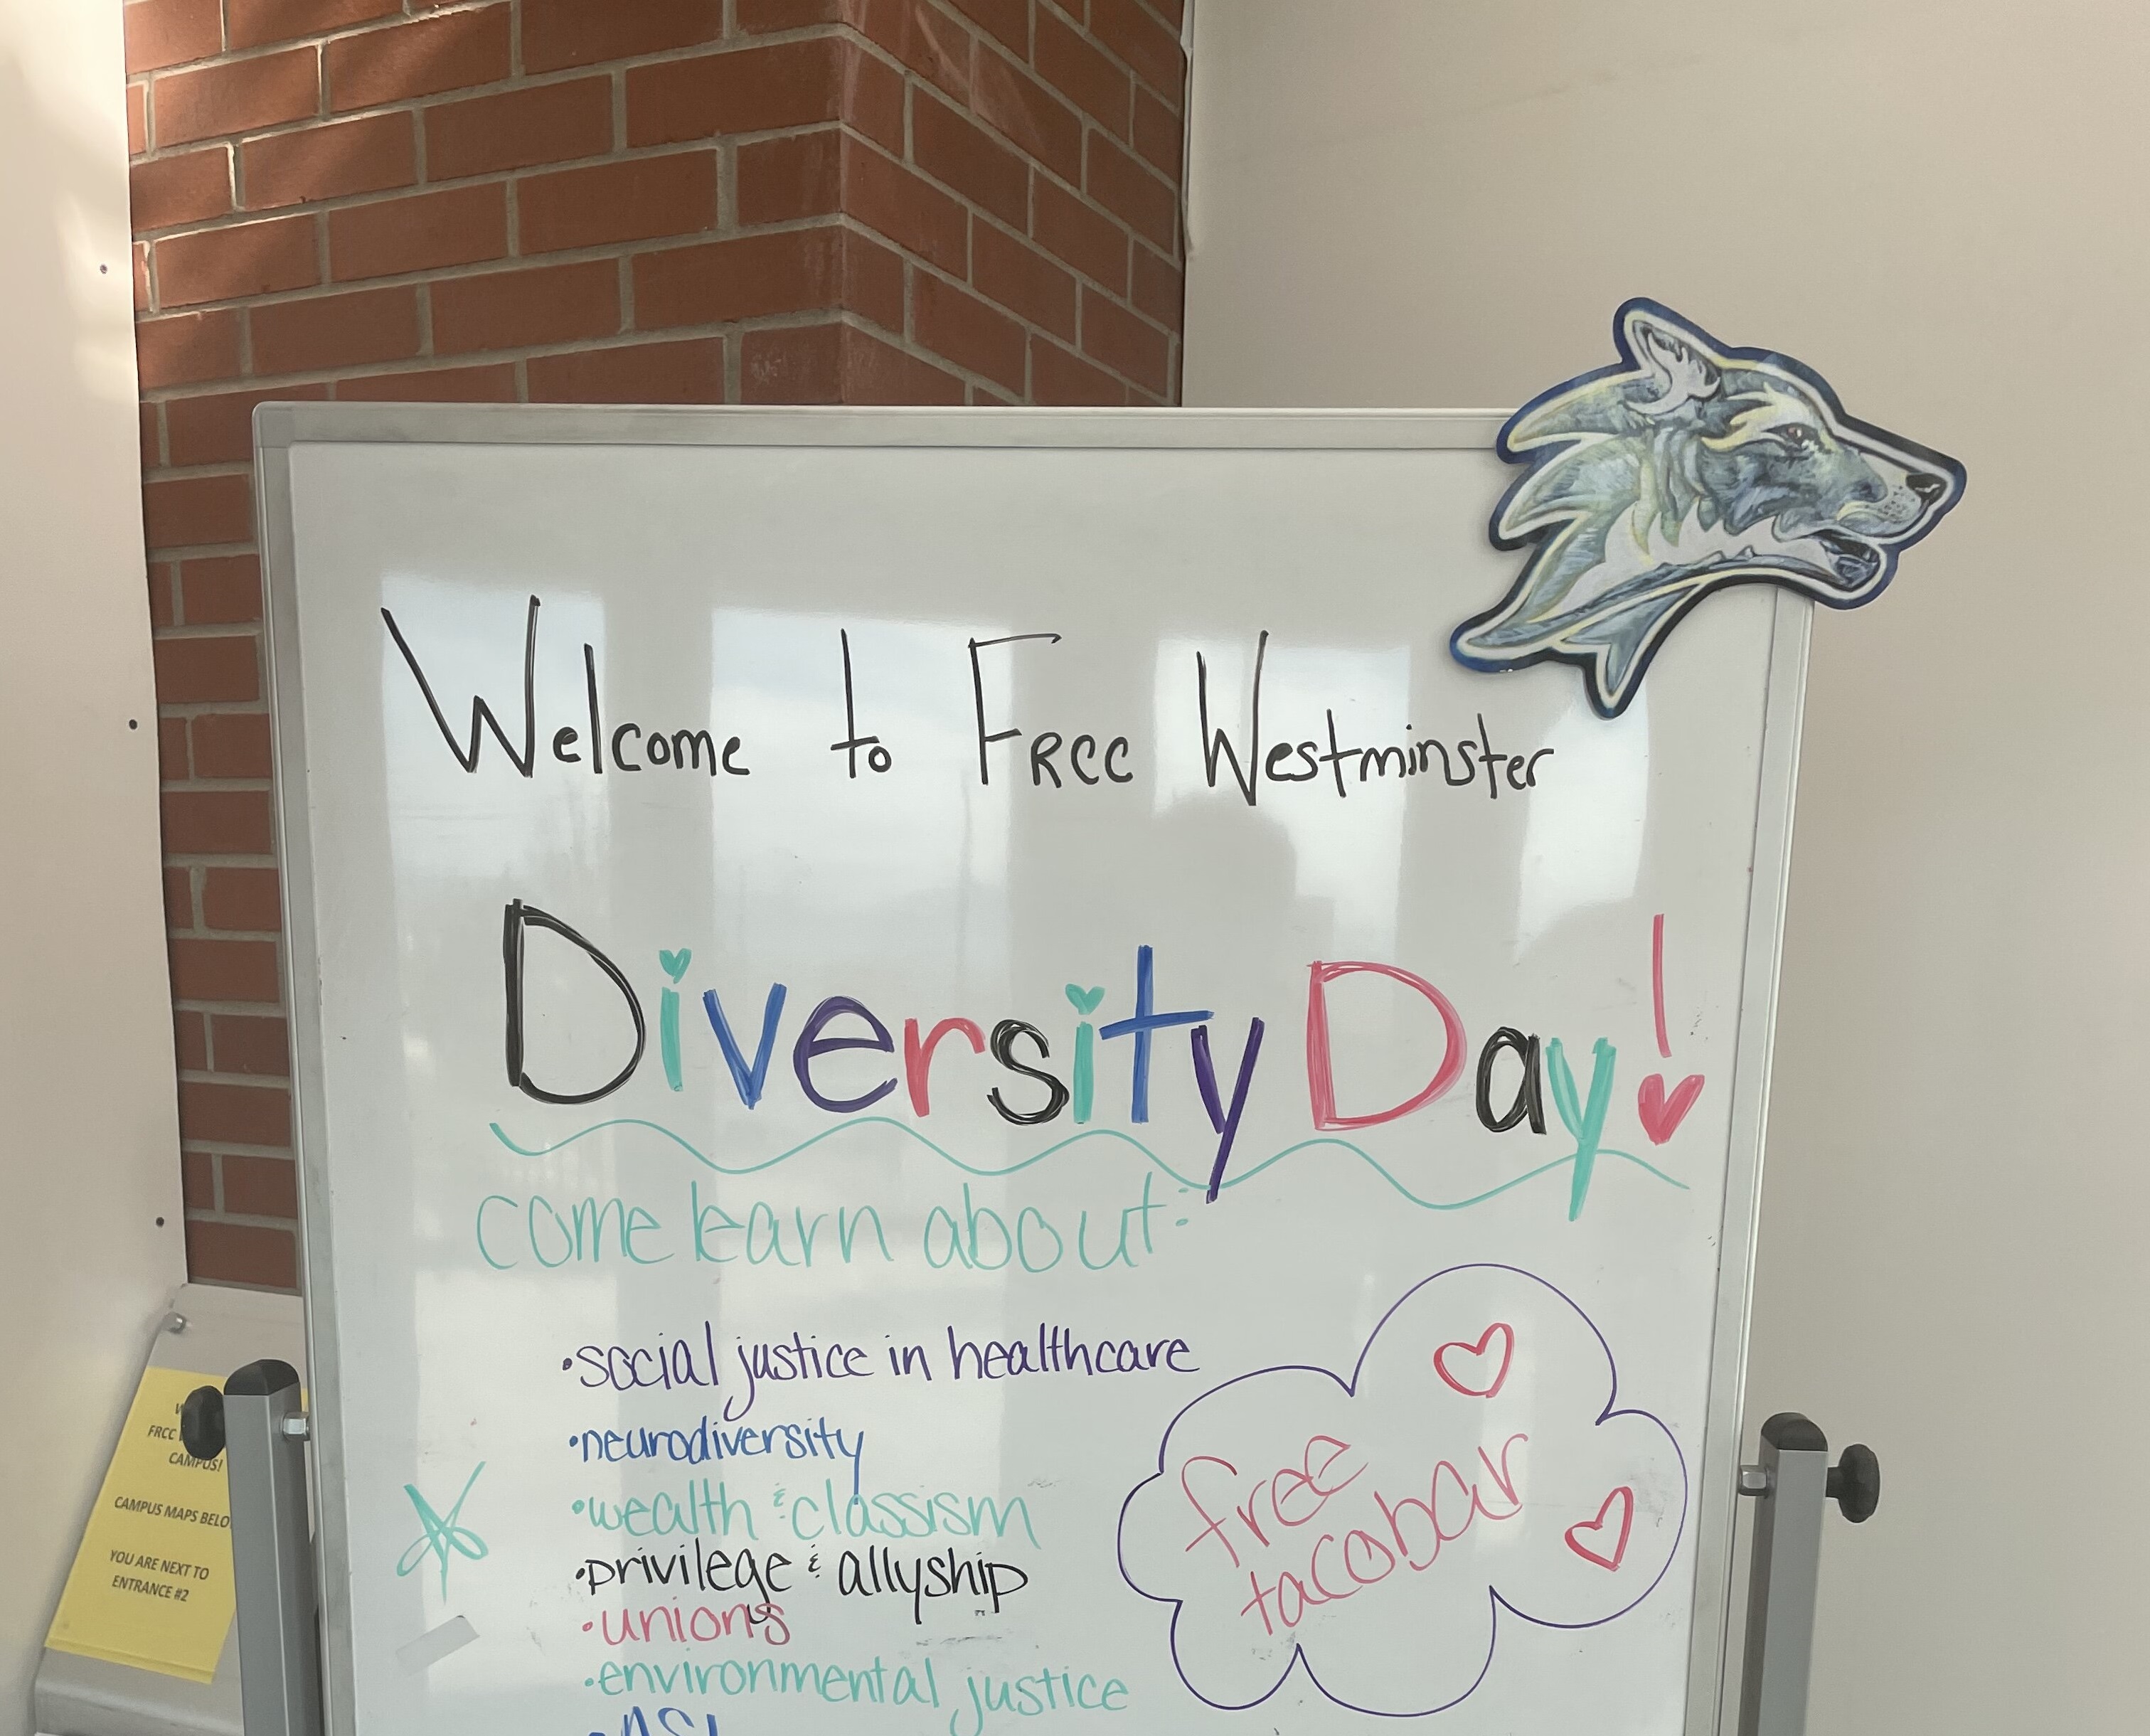 Diversity Day 2022: An Overview